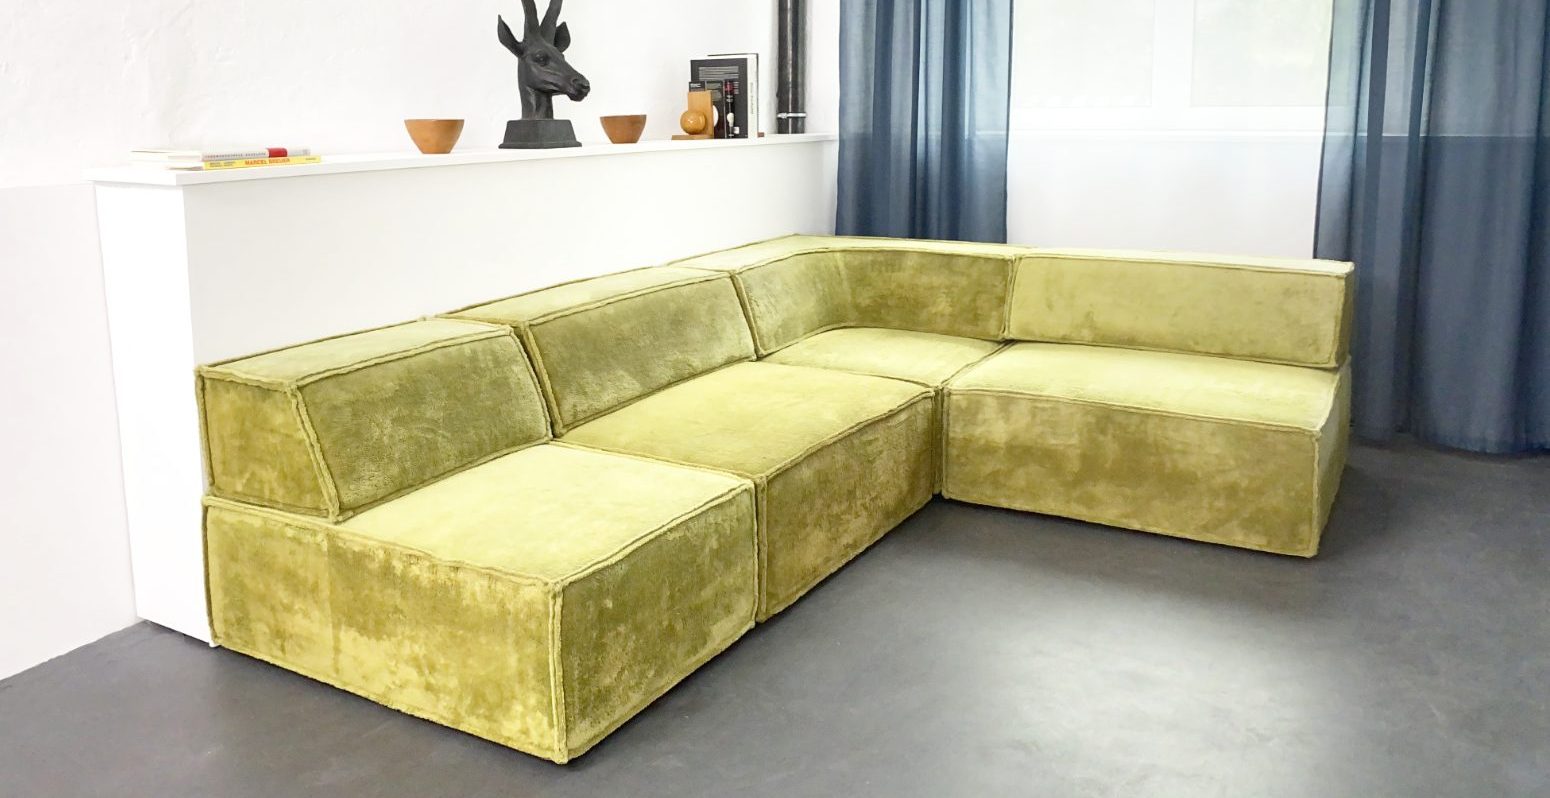 Modular COR Trio Sofa by Team Form AG, Switzerland, for COR, Germany, 70s.